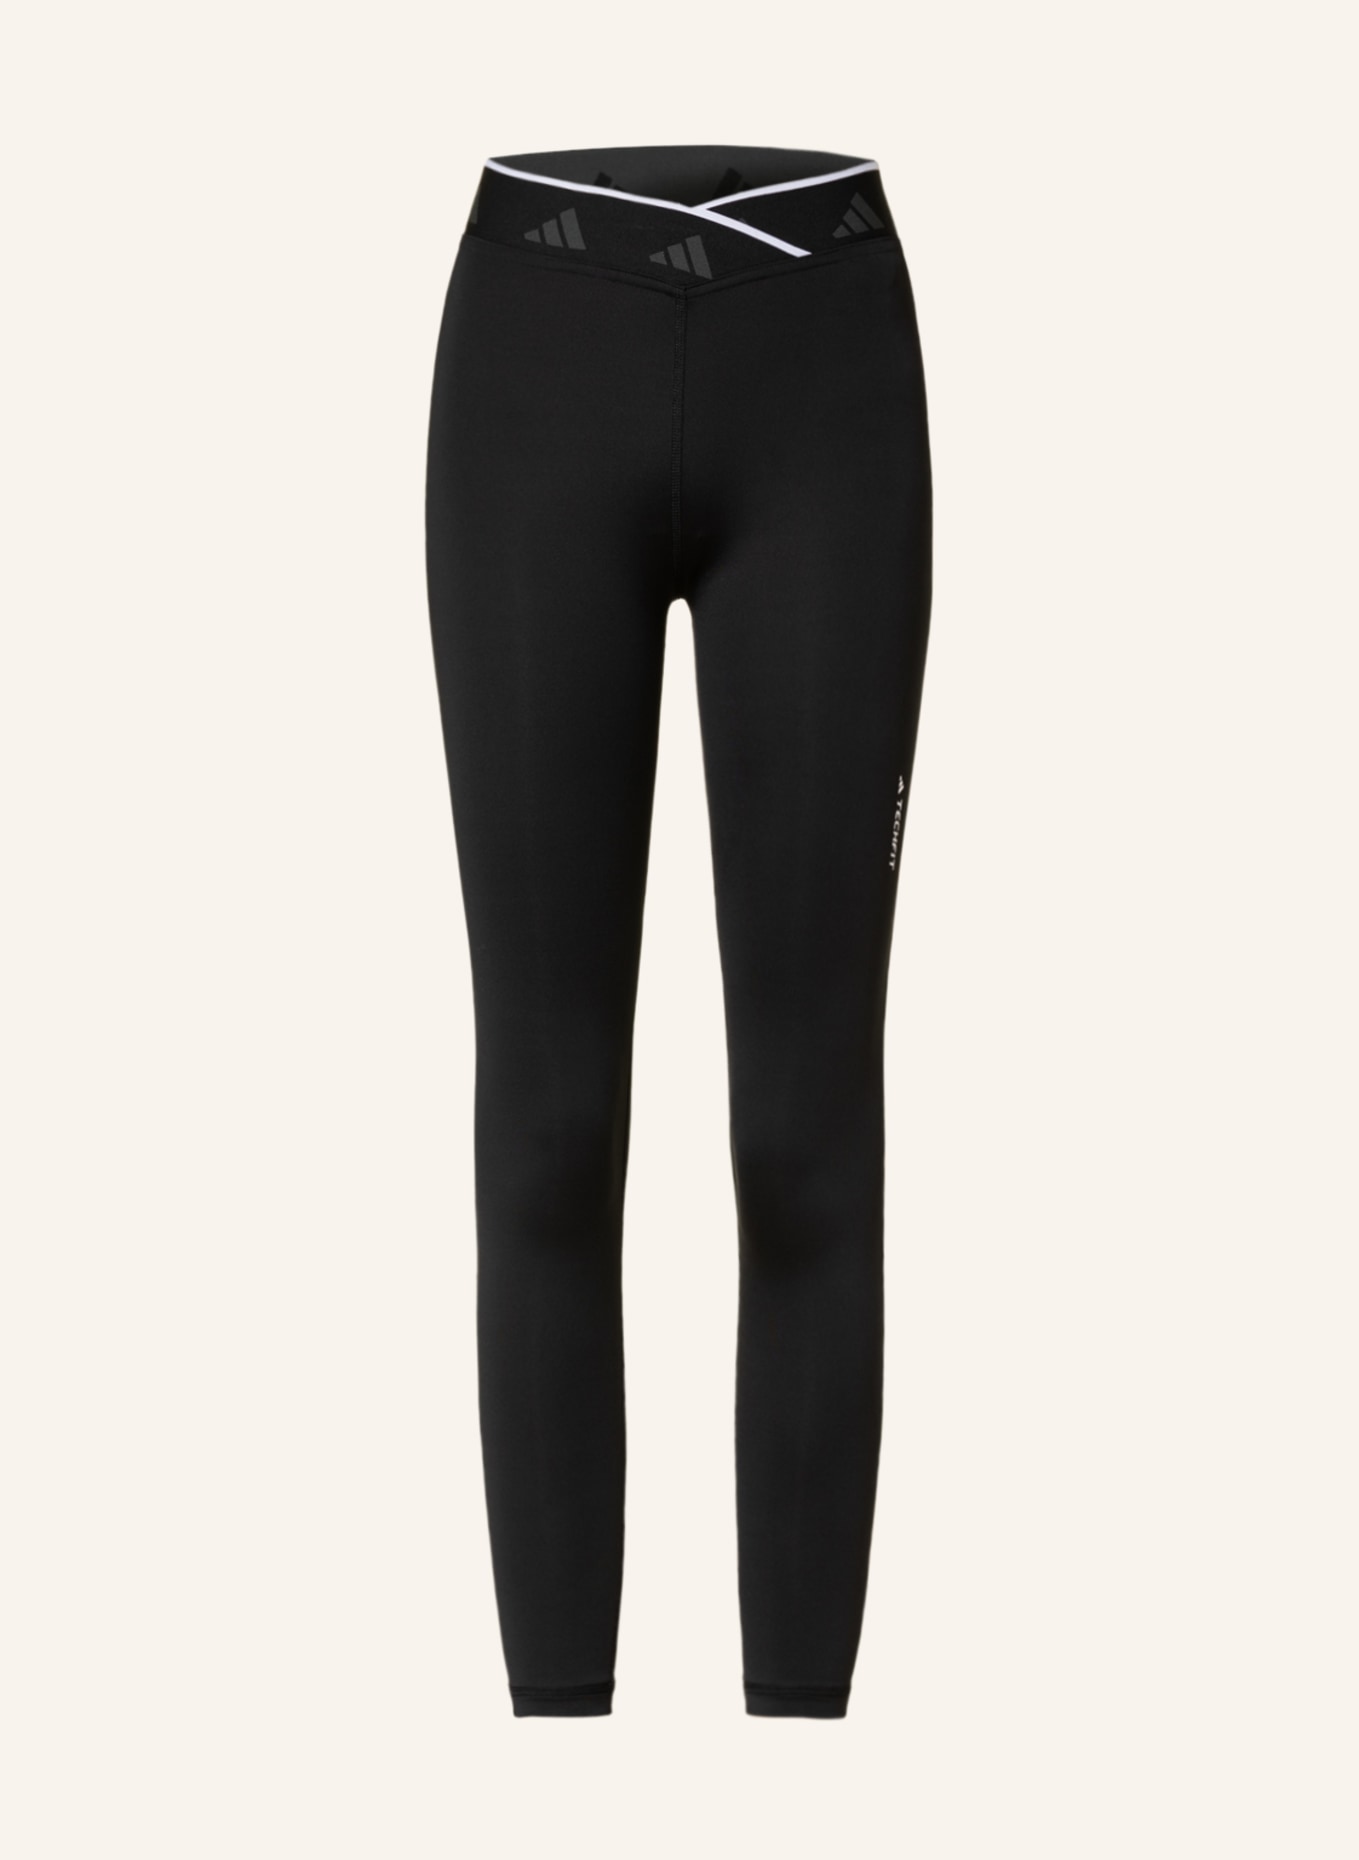 Online offer in Adidas Techfit Tights